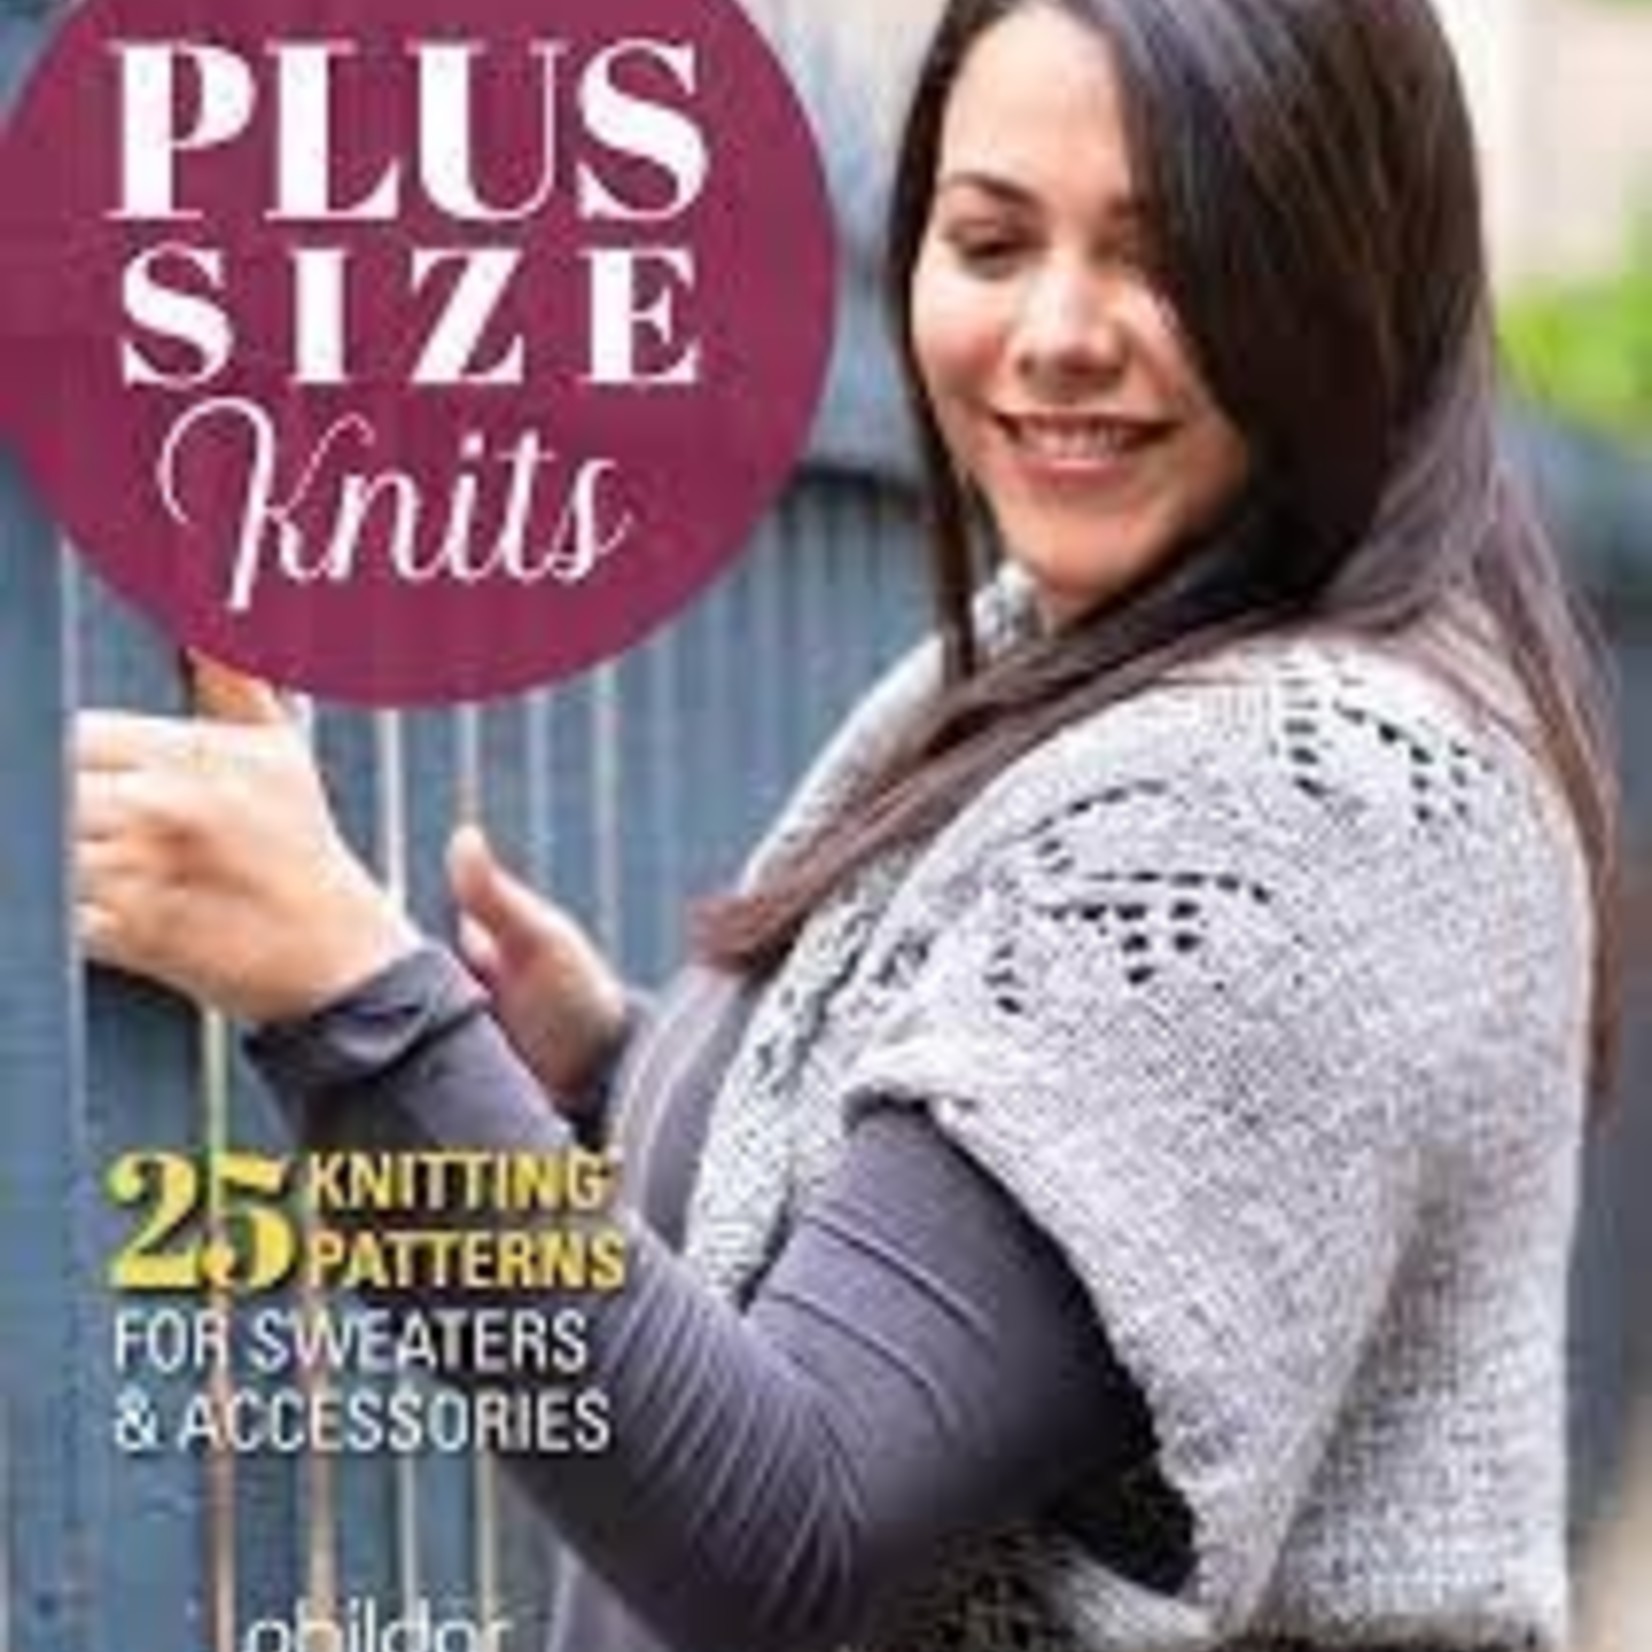 Book: Plus Size Knits: 25 Knitting Patterns for Sweaters & Accessories